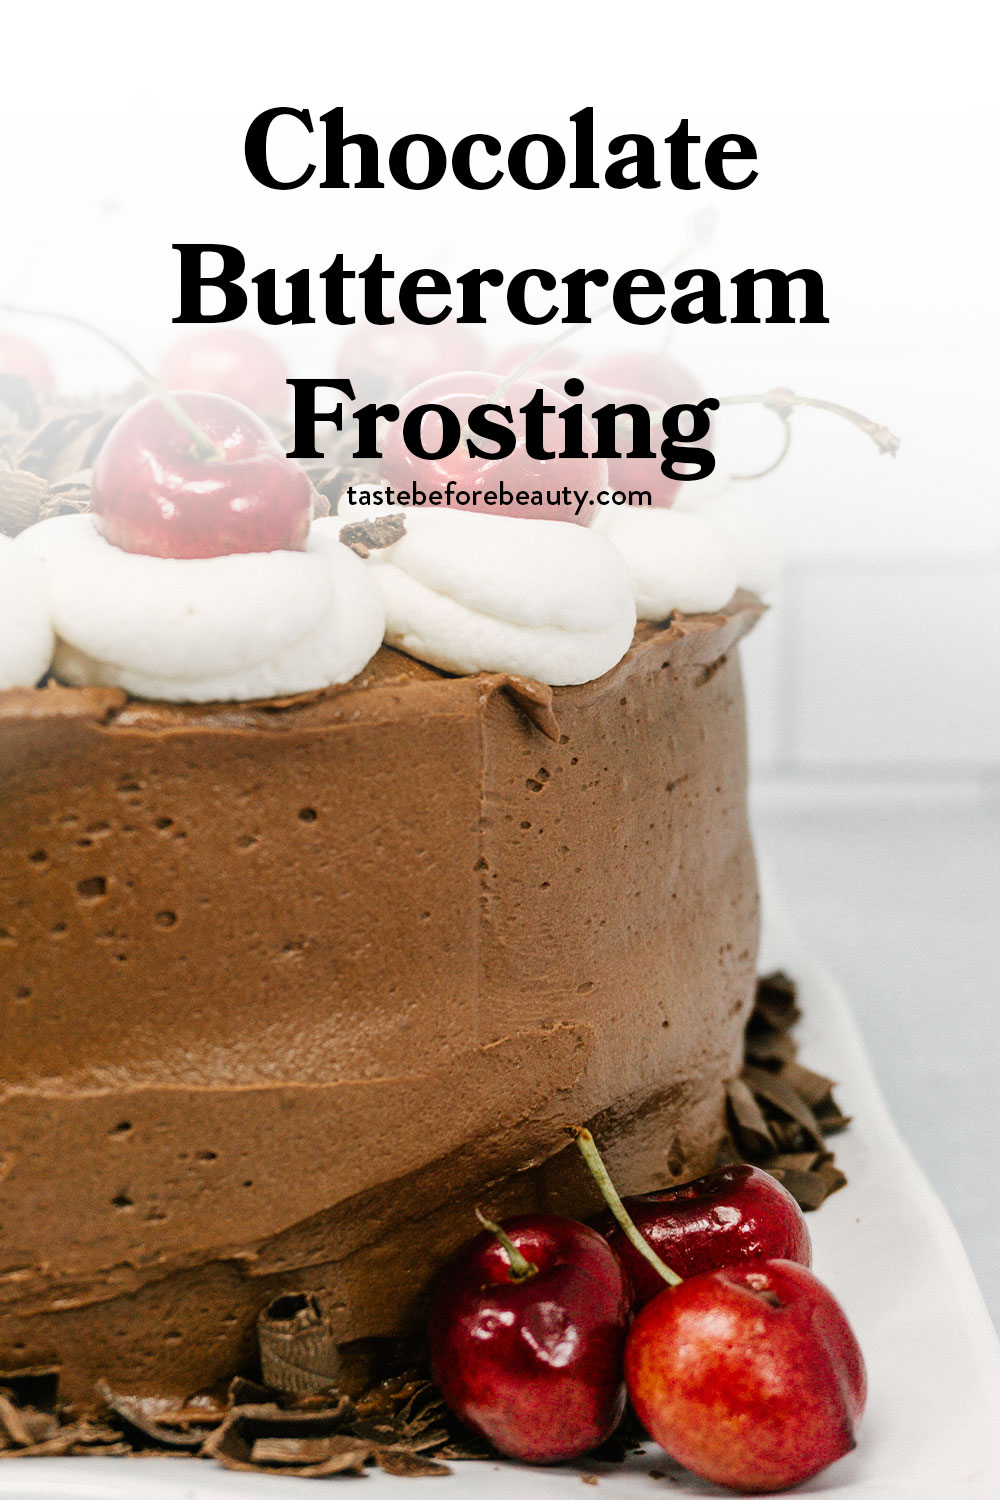 taste before beauty chocolate buttercream frosting on cake with cherries pinterest pin